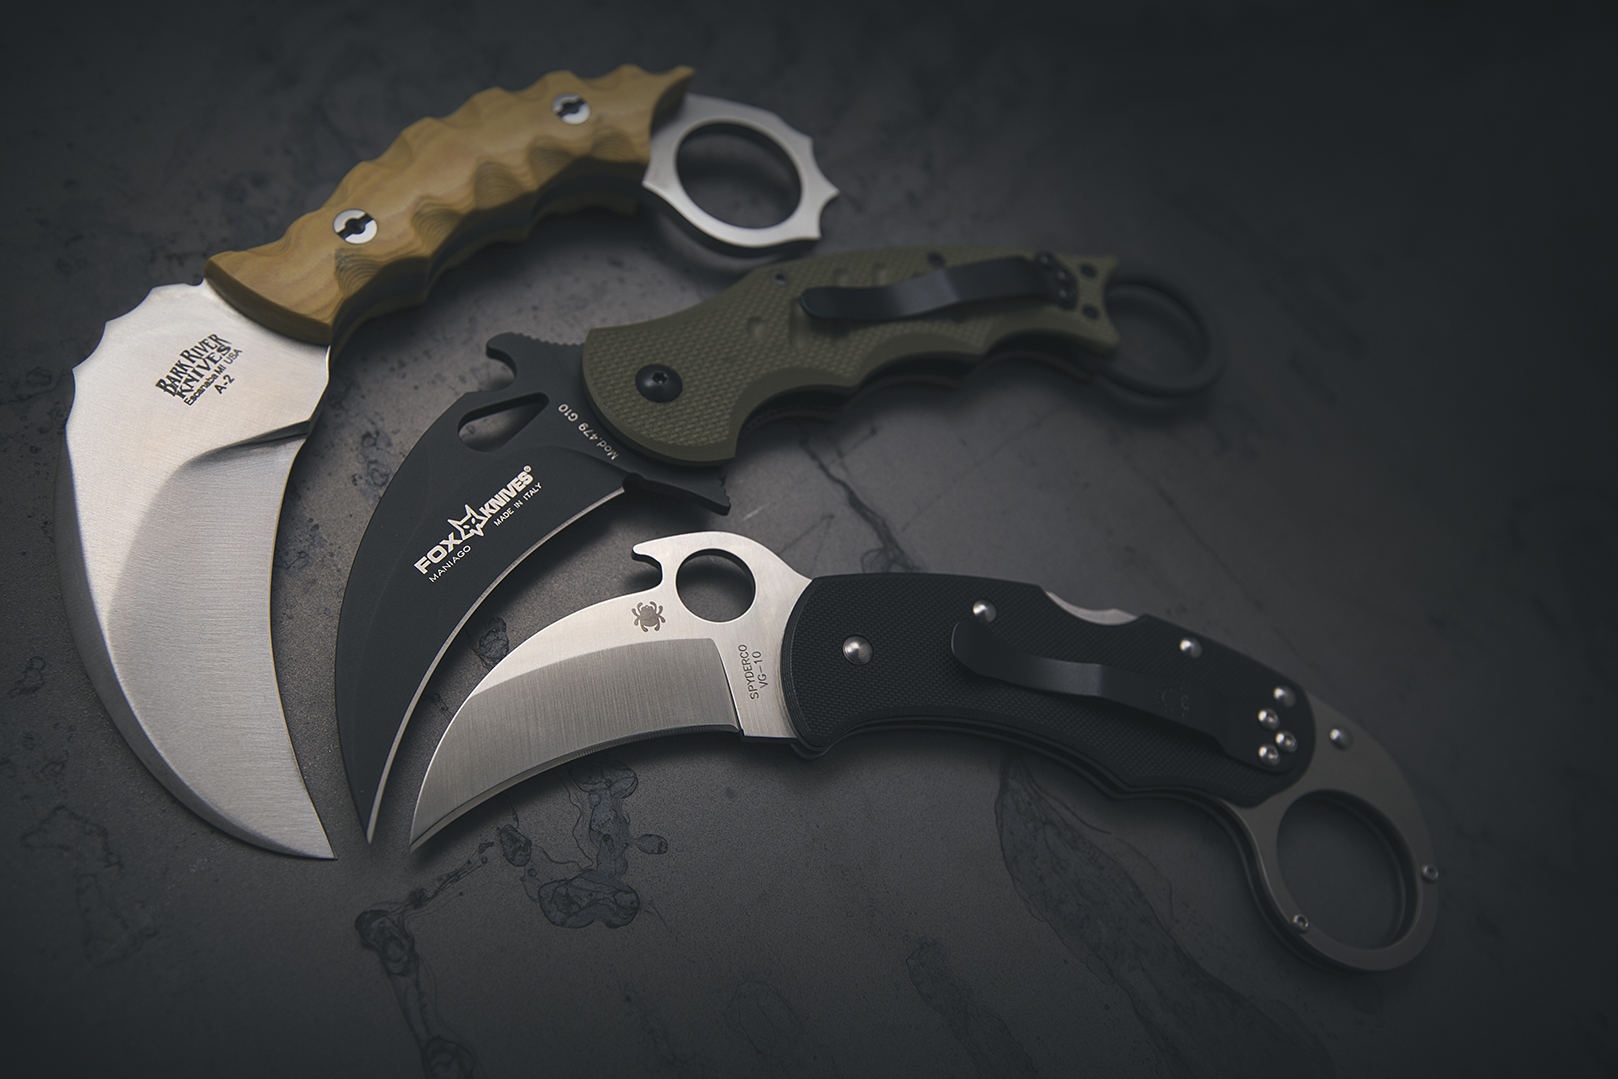 The Karambit Knife: What Is It?